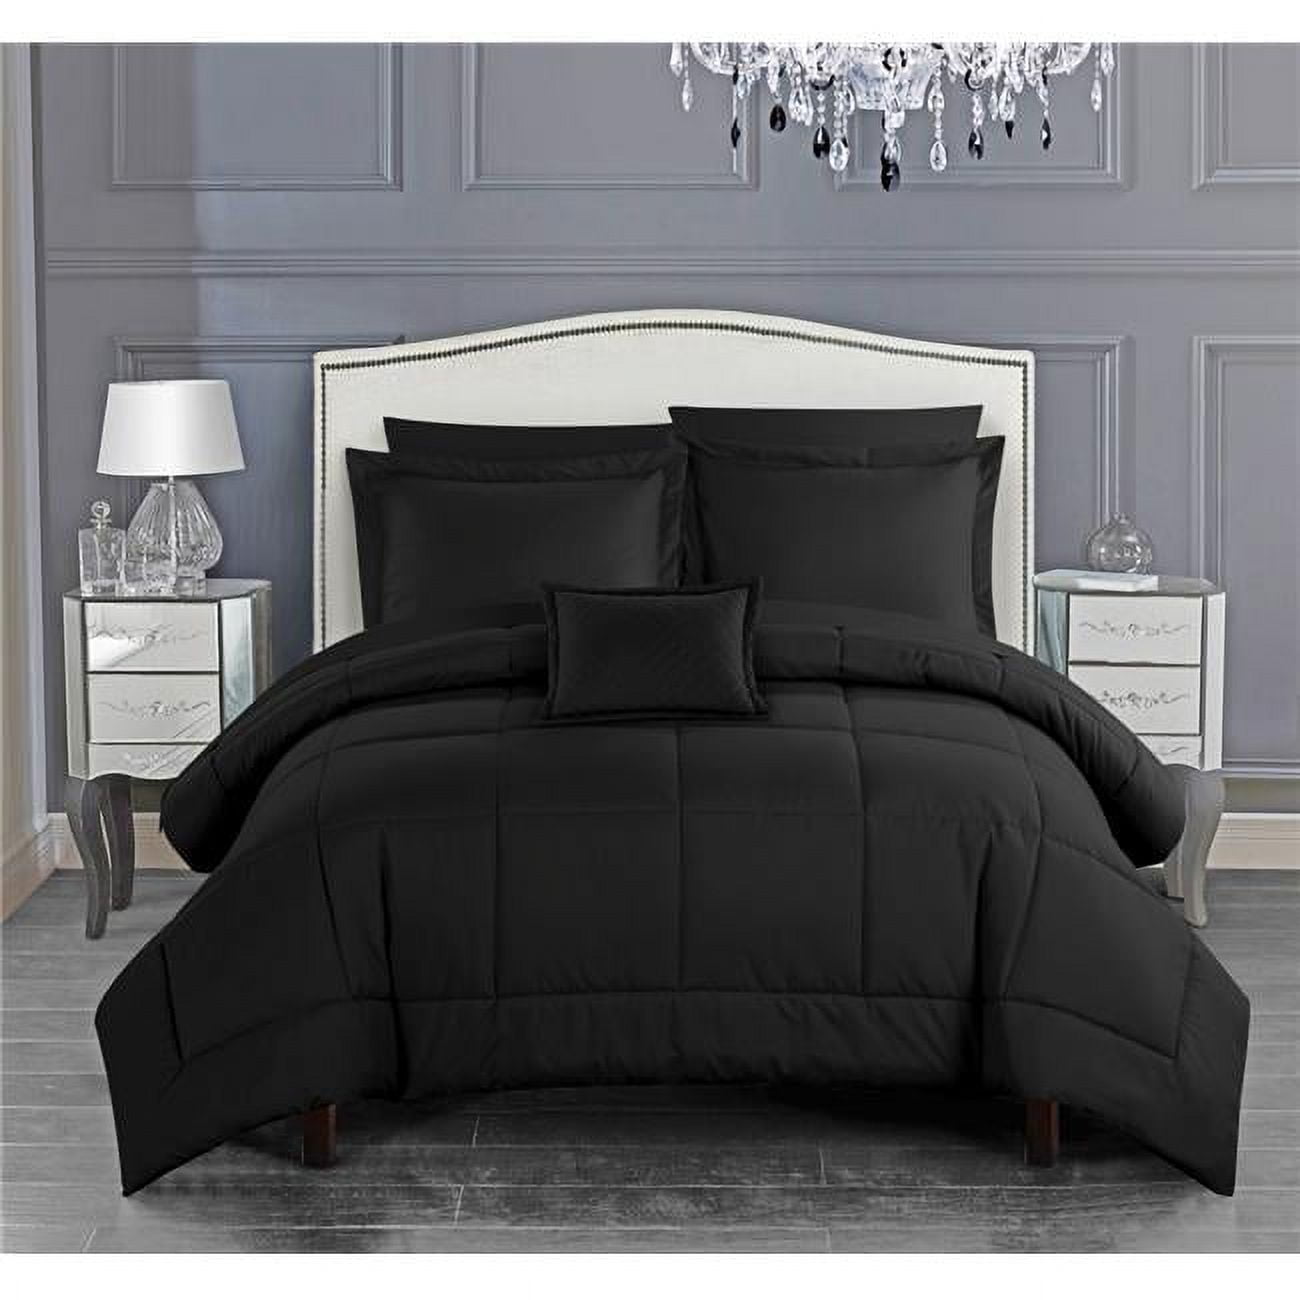 Queen Size Josaia Comforter Set Pieced Solid Color Stitched Design Bed In A Bedding Sheets & Decorative Pillow Shams Included, Black - 8 Piece